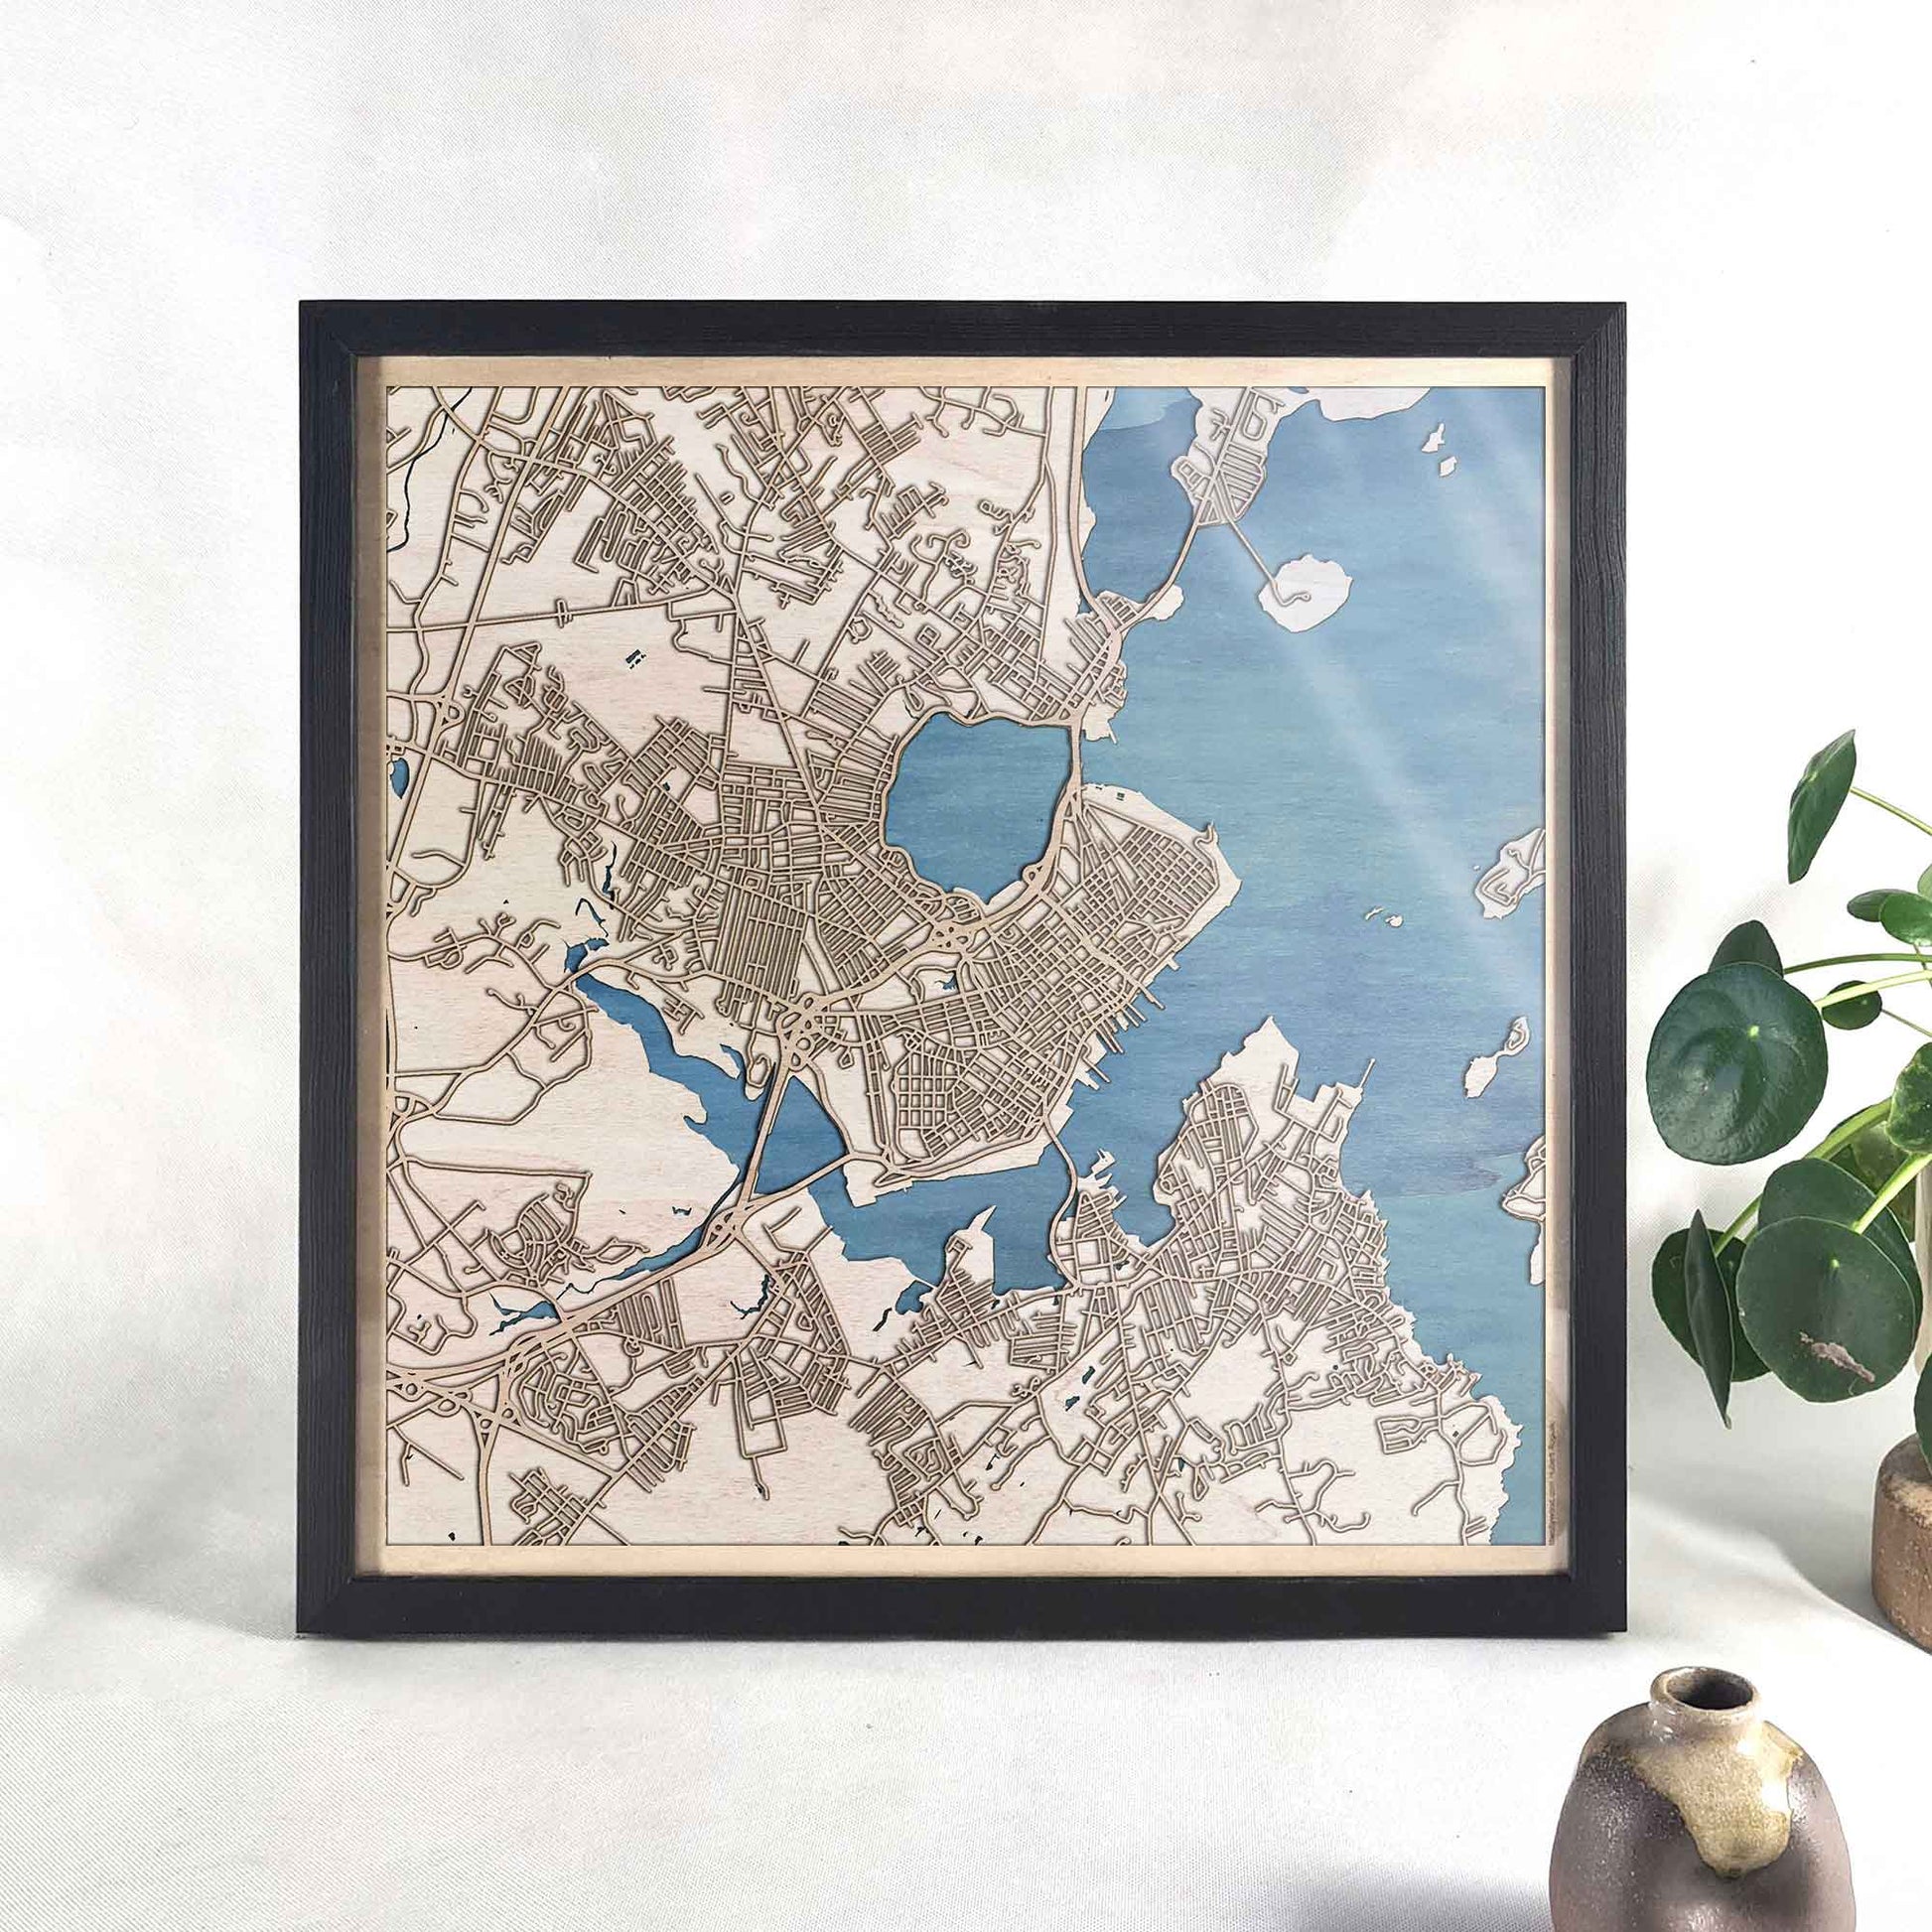 Portland Maine Wooden Map by CityWood - Custom Wood Map Art - Unique Laser Cut Engraved - Anniversary Gift